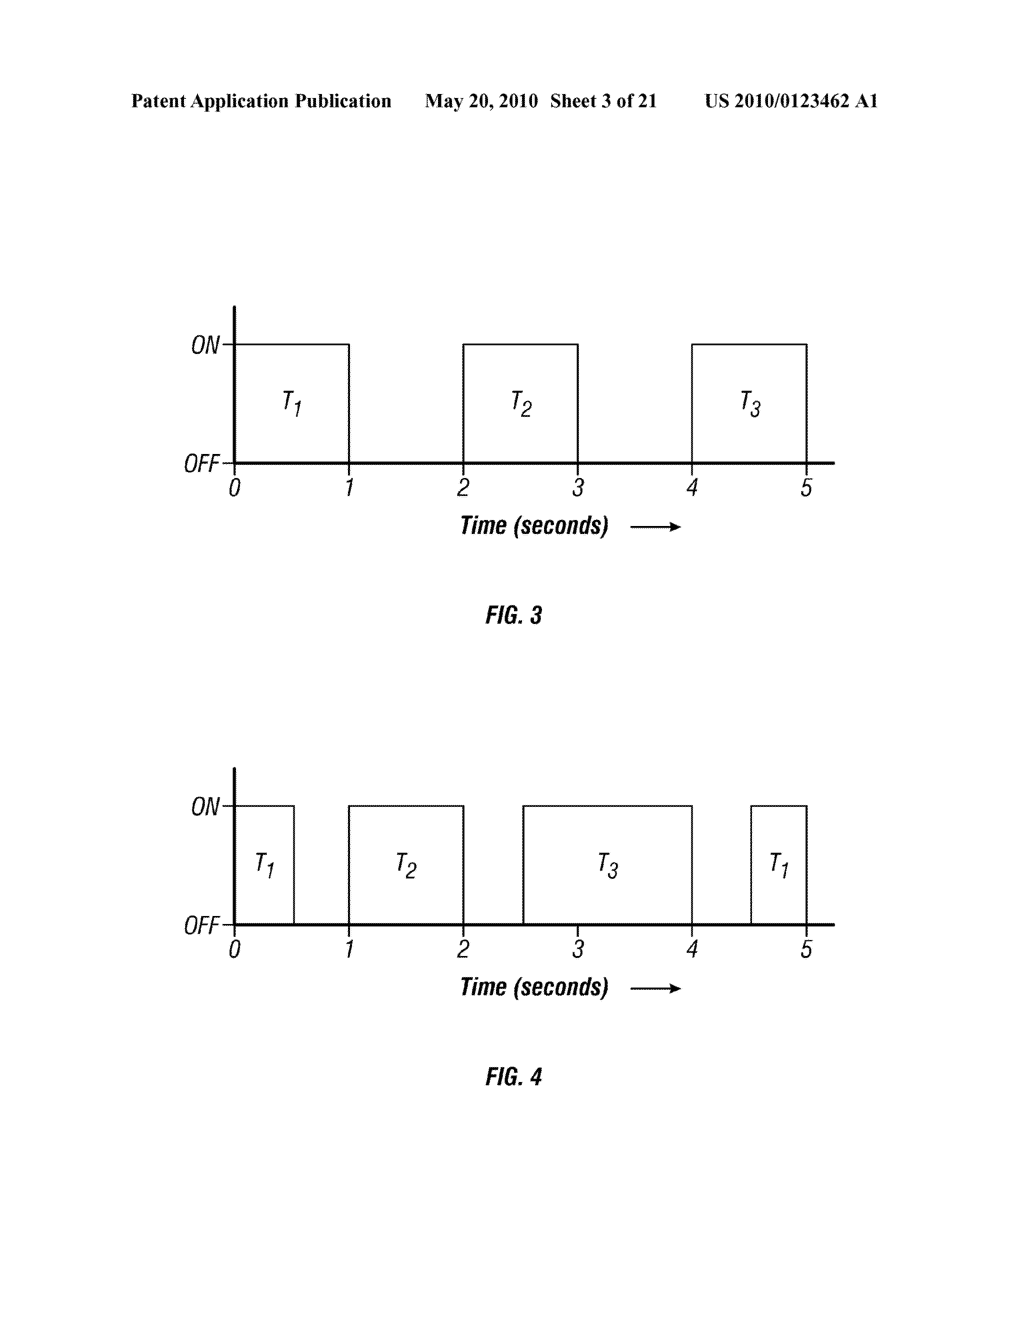 Electromagnetic Wave Resistivity Tool Having a Tilted Antenna for Geosteering within a Desired Payzone - diagram, schematic, and image 04